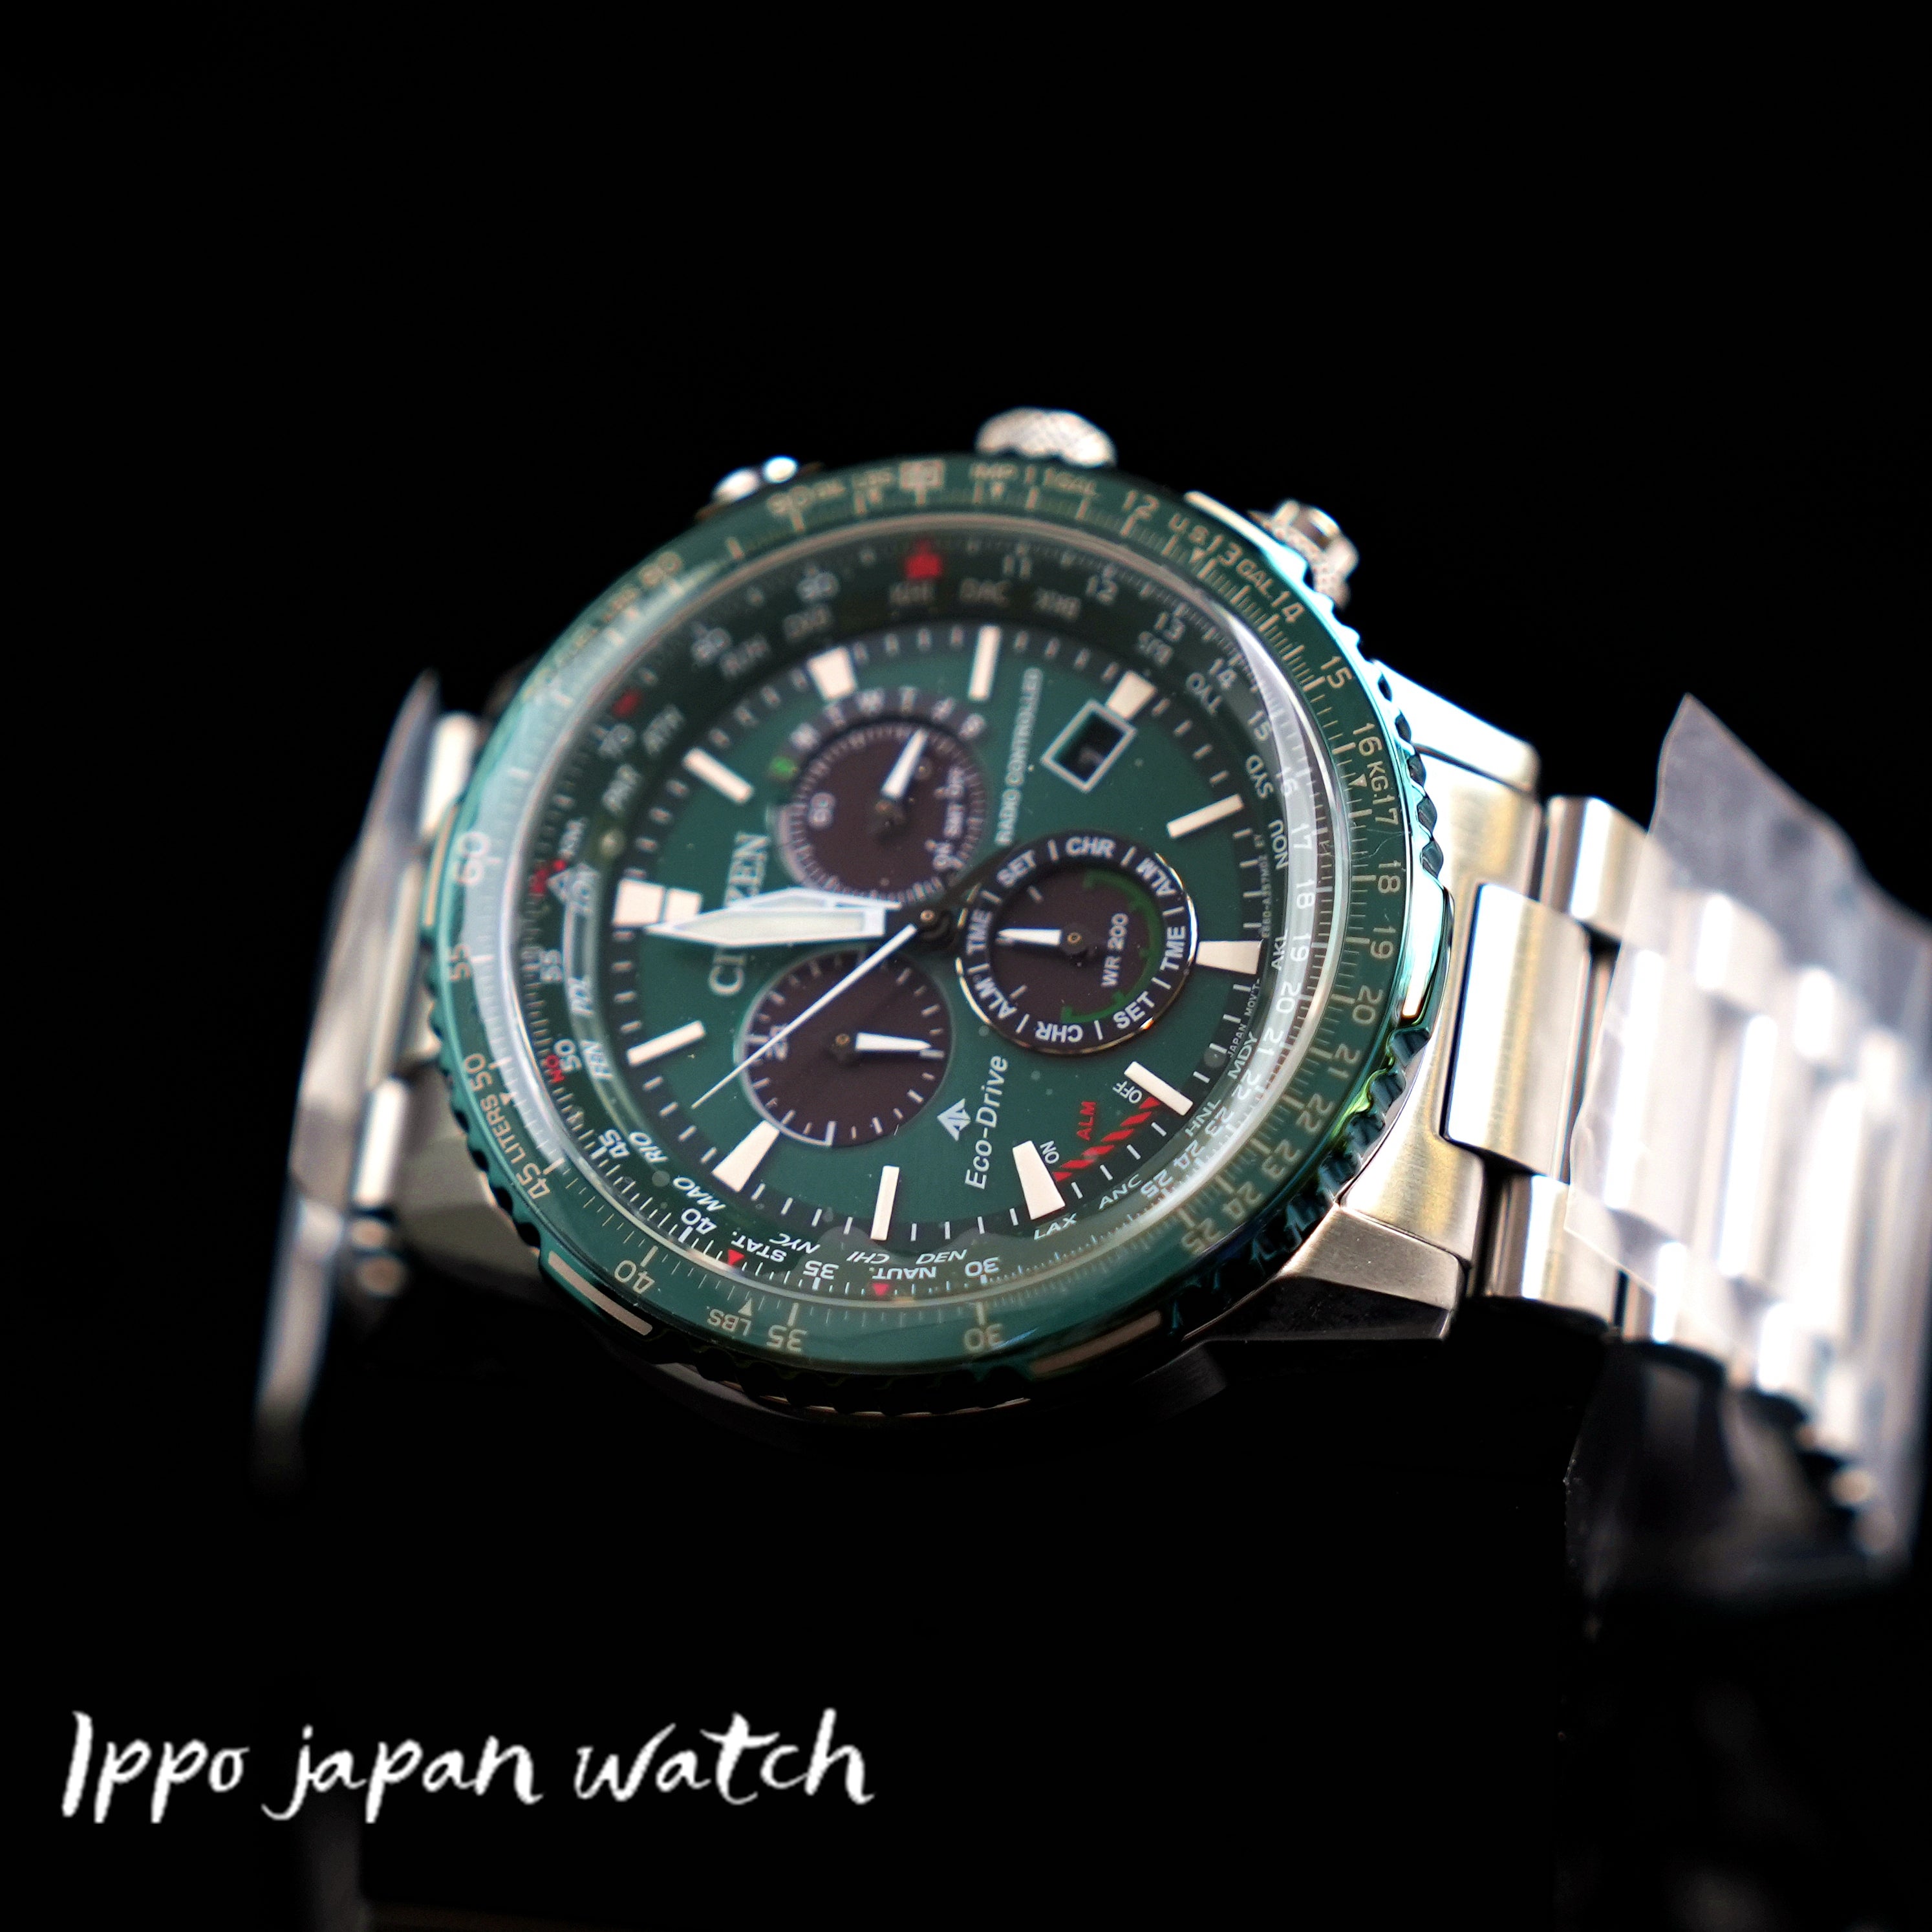 – CITIZEN photovoltaic JAPAN WATCH watch 20 CB5004-59W eco-drive IPPO promaster stainless